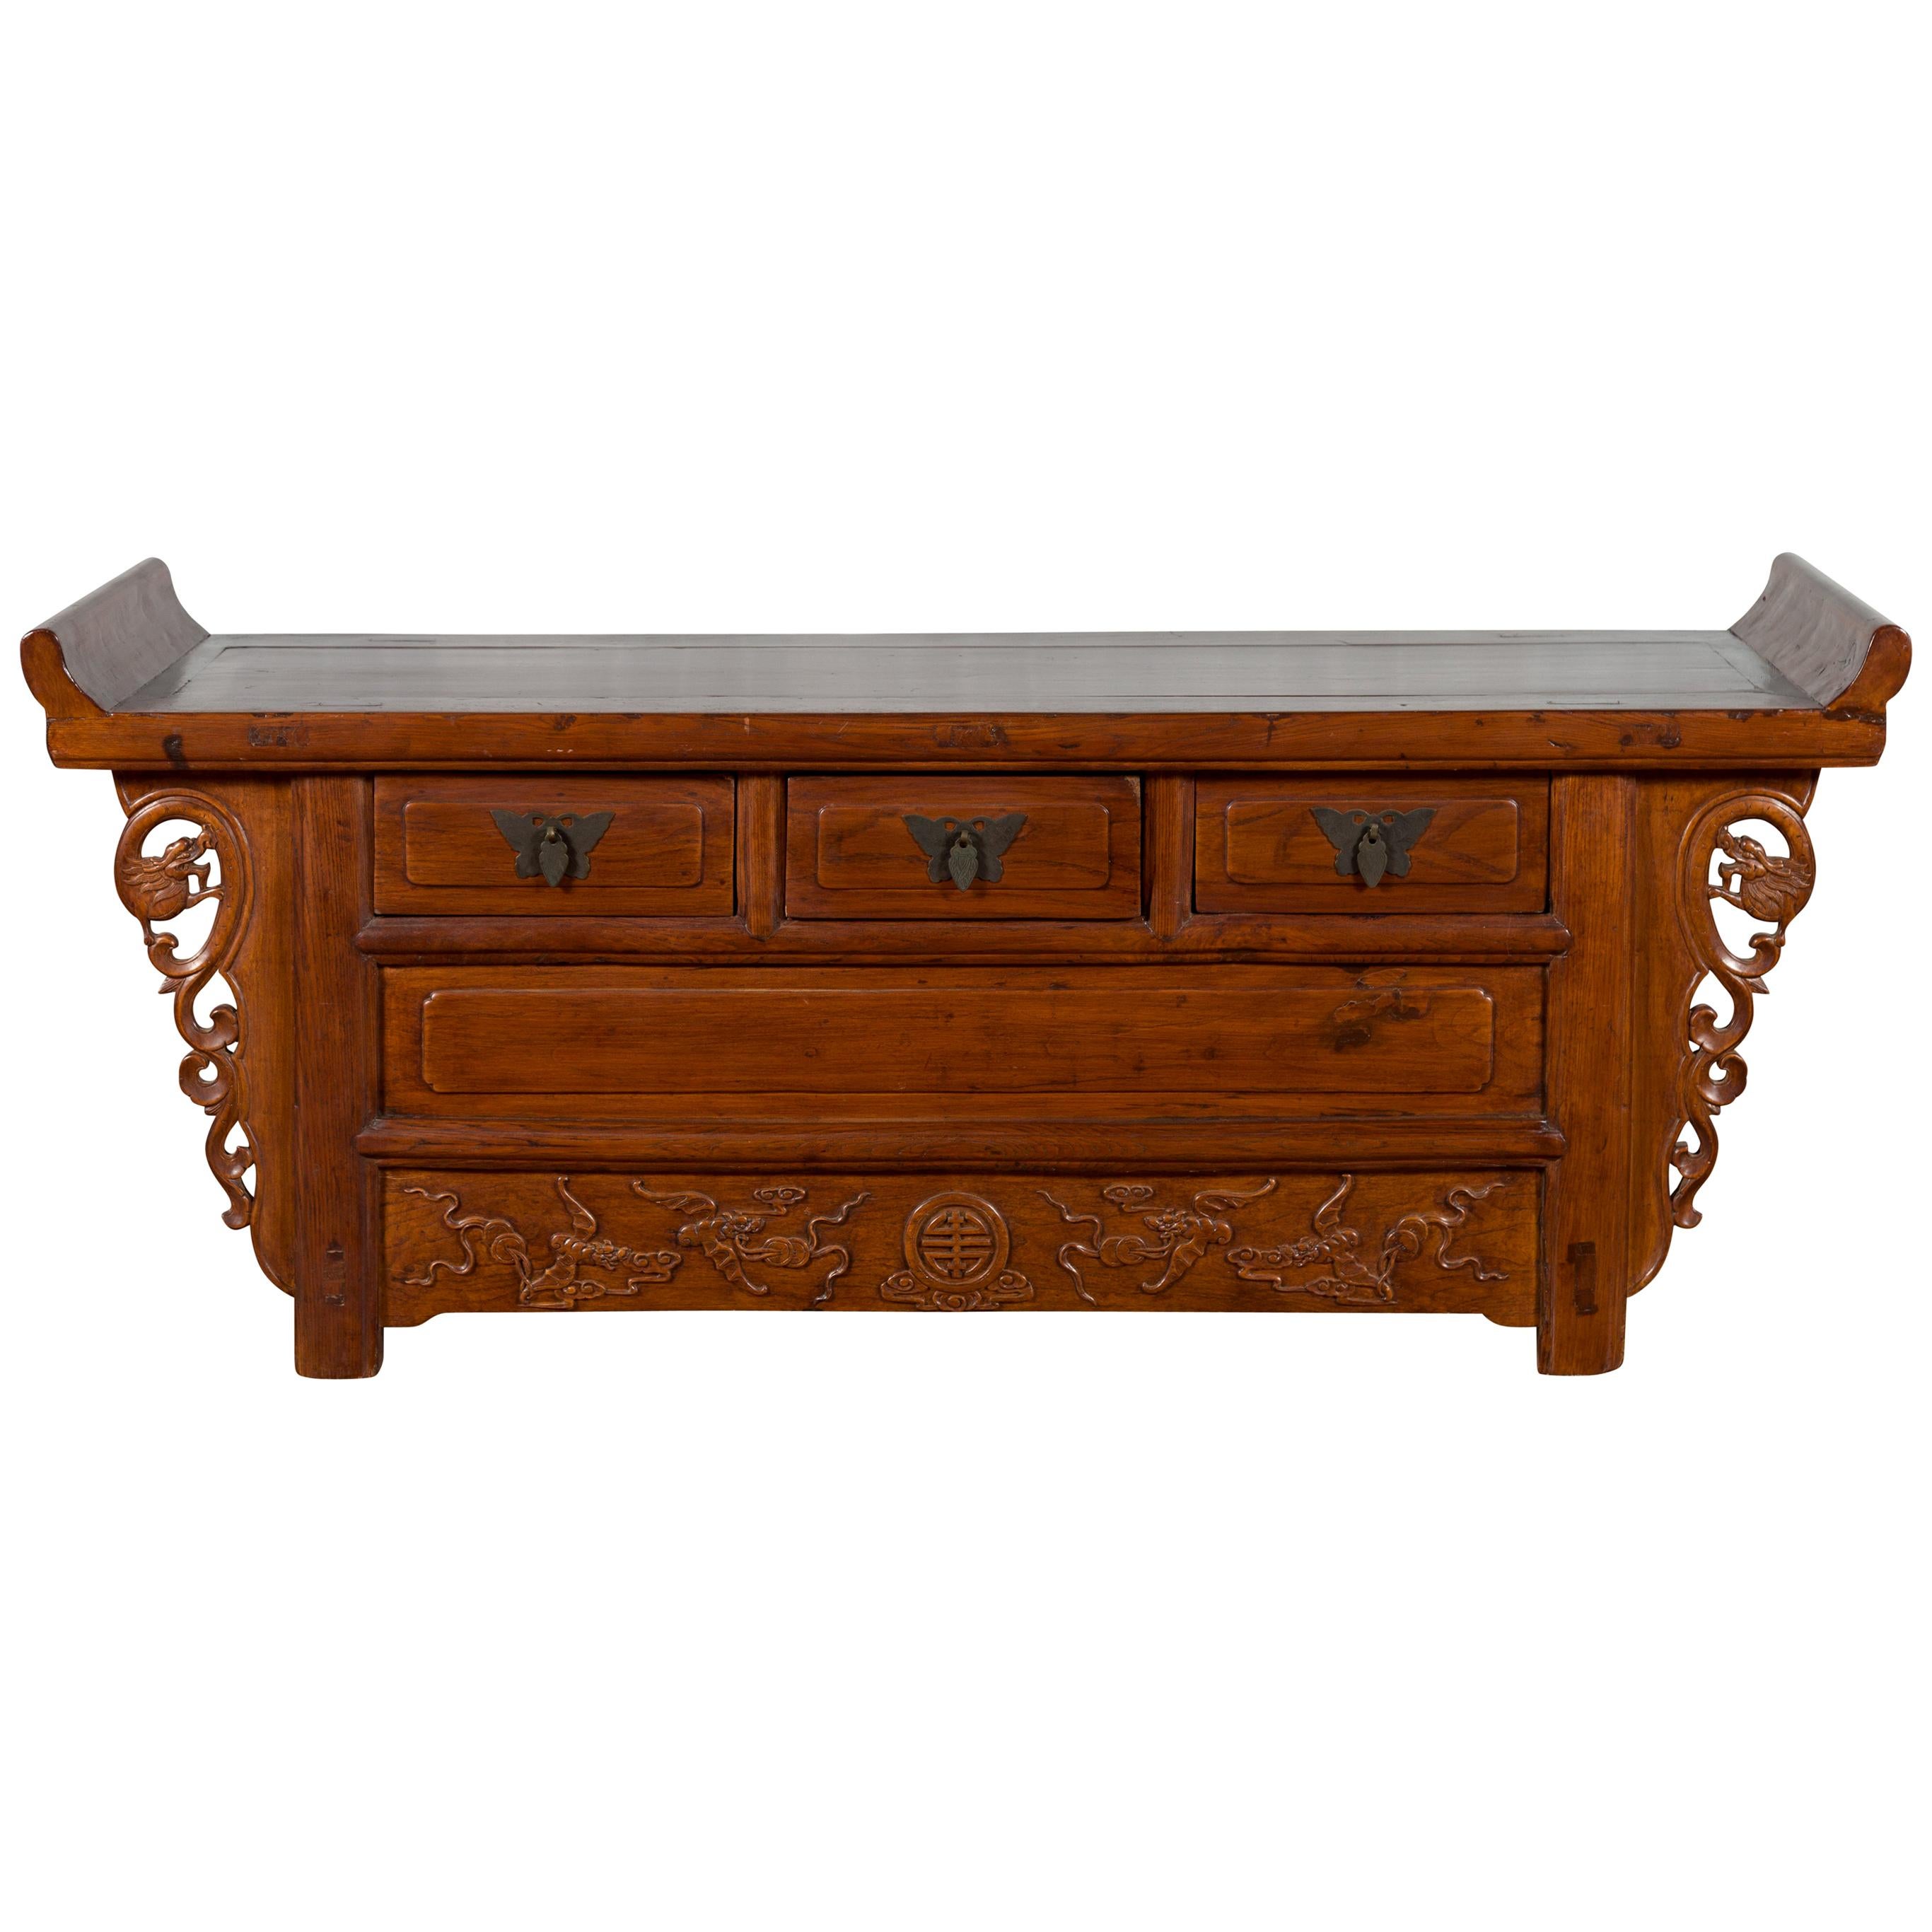 Chinese Elm Three-Drawer Kang Cabinet with Everted Flanges and Carved Spandrels